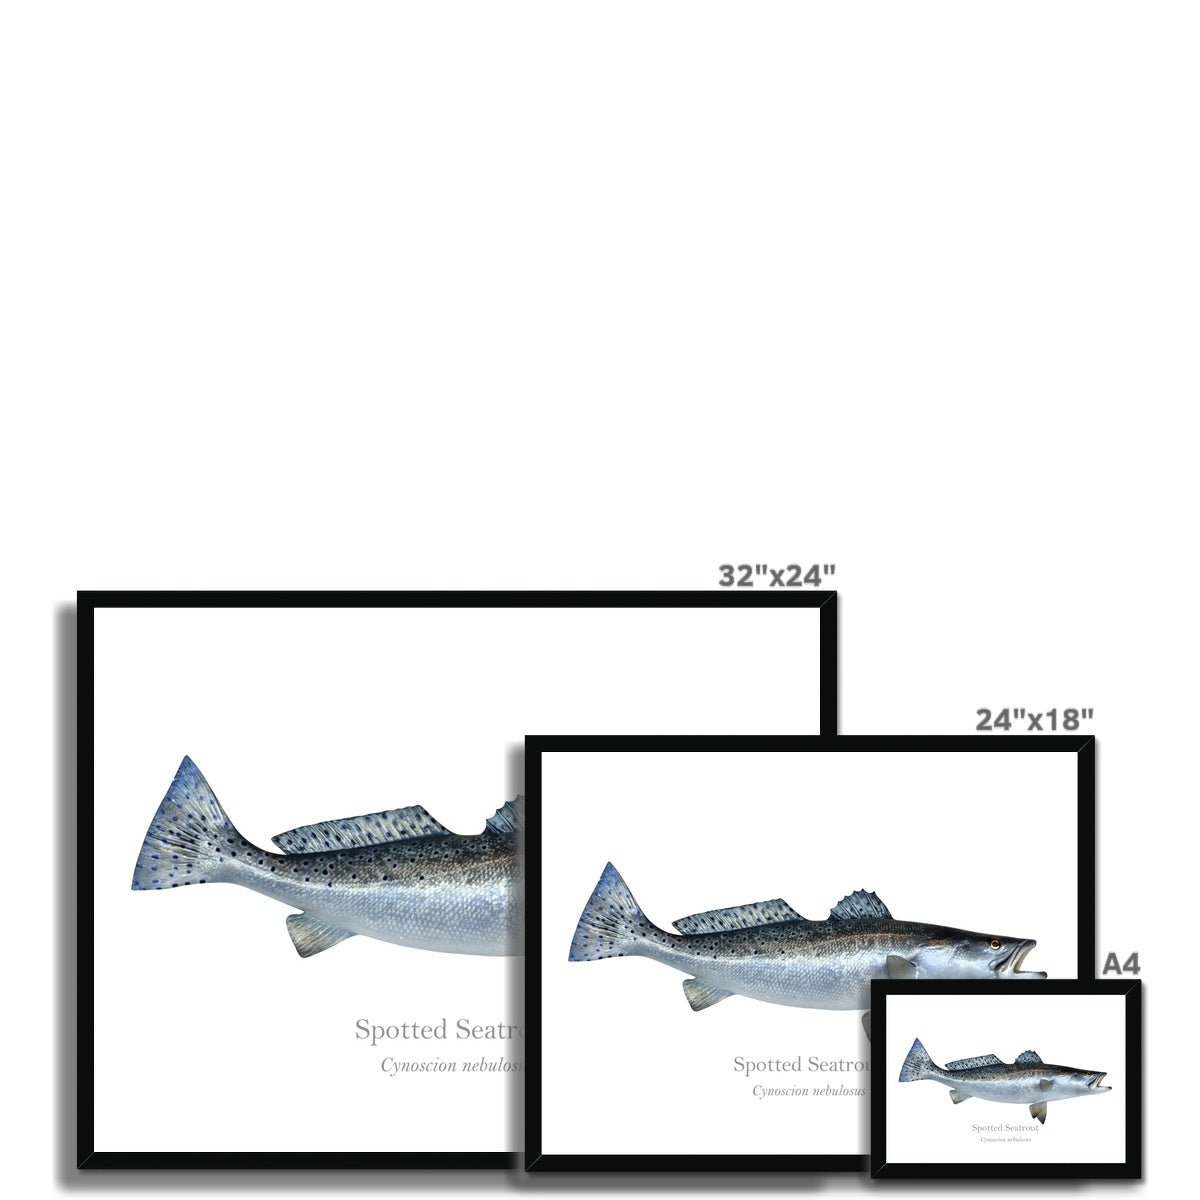 Spotted Seatrout - Framed Print - With Scientific Name - madfishlab.com